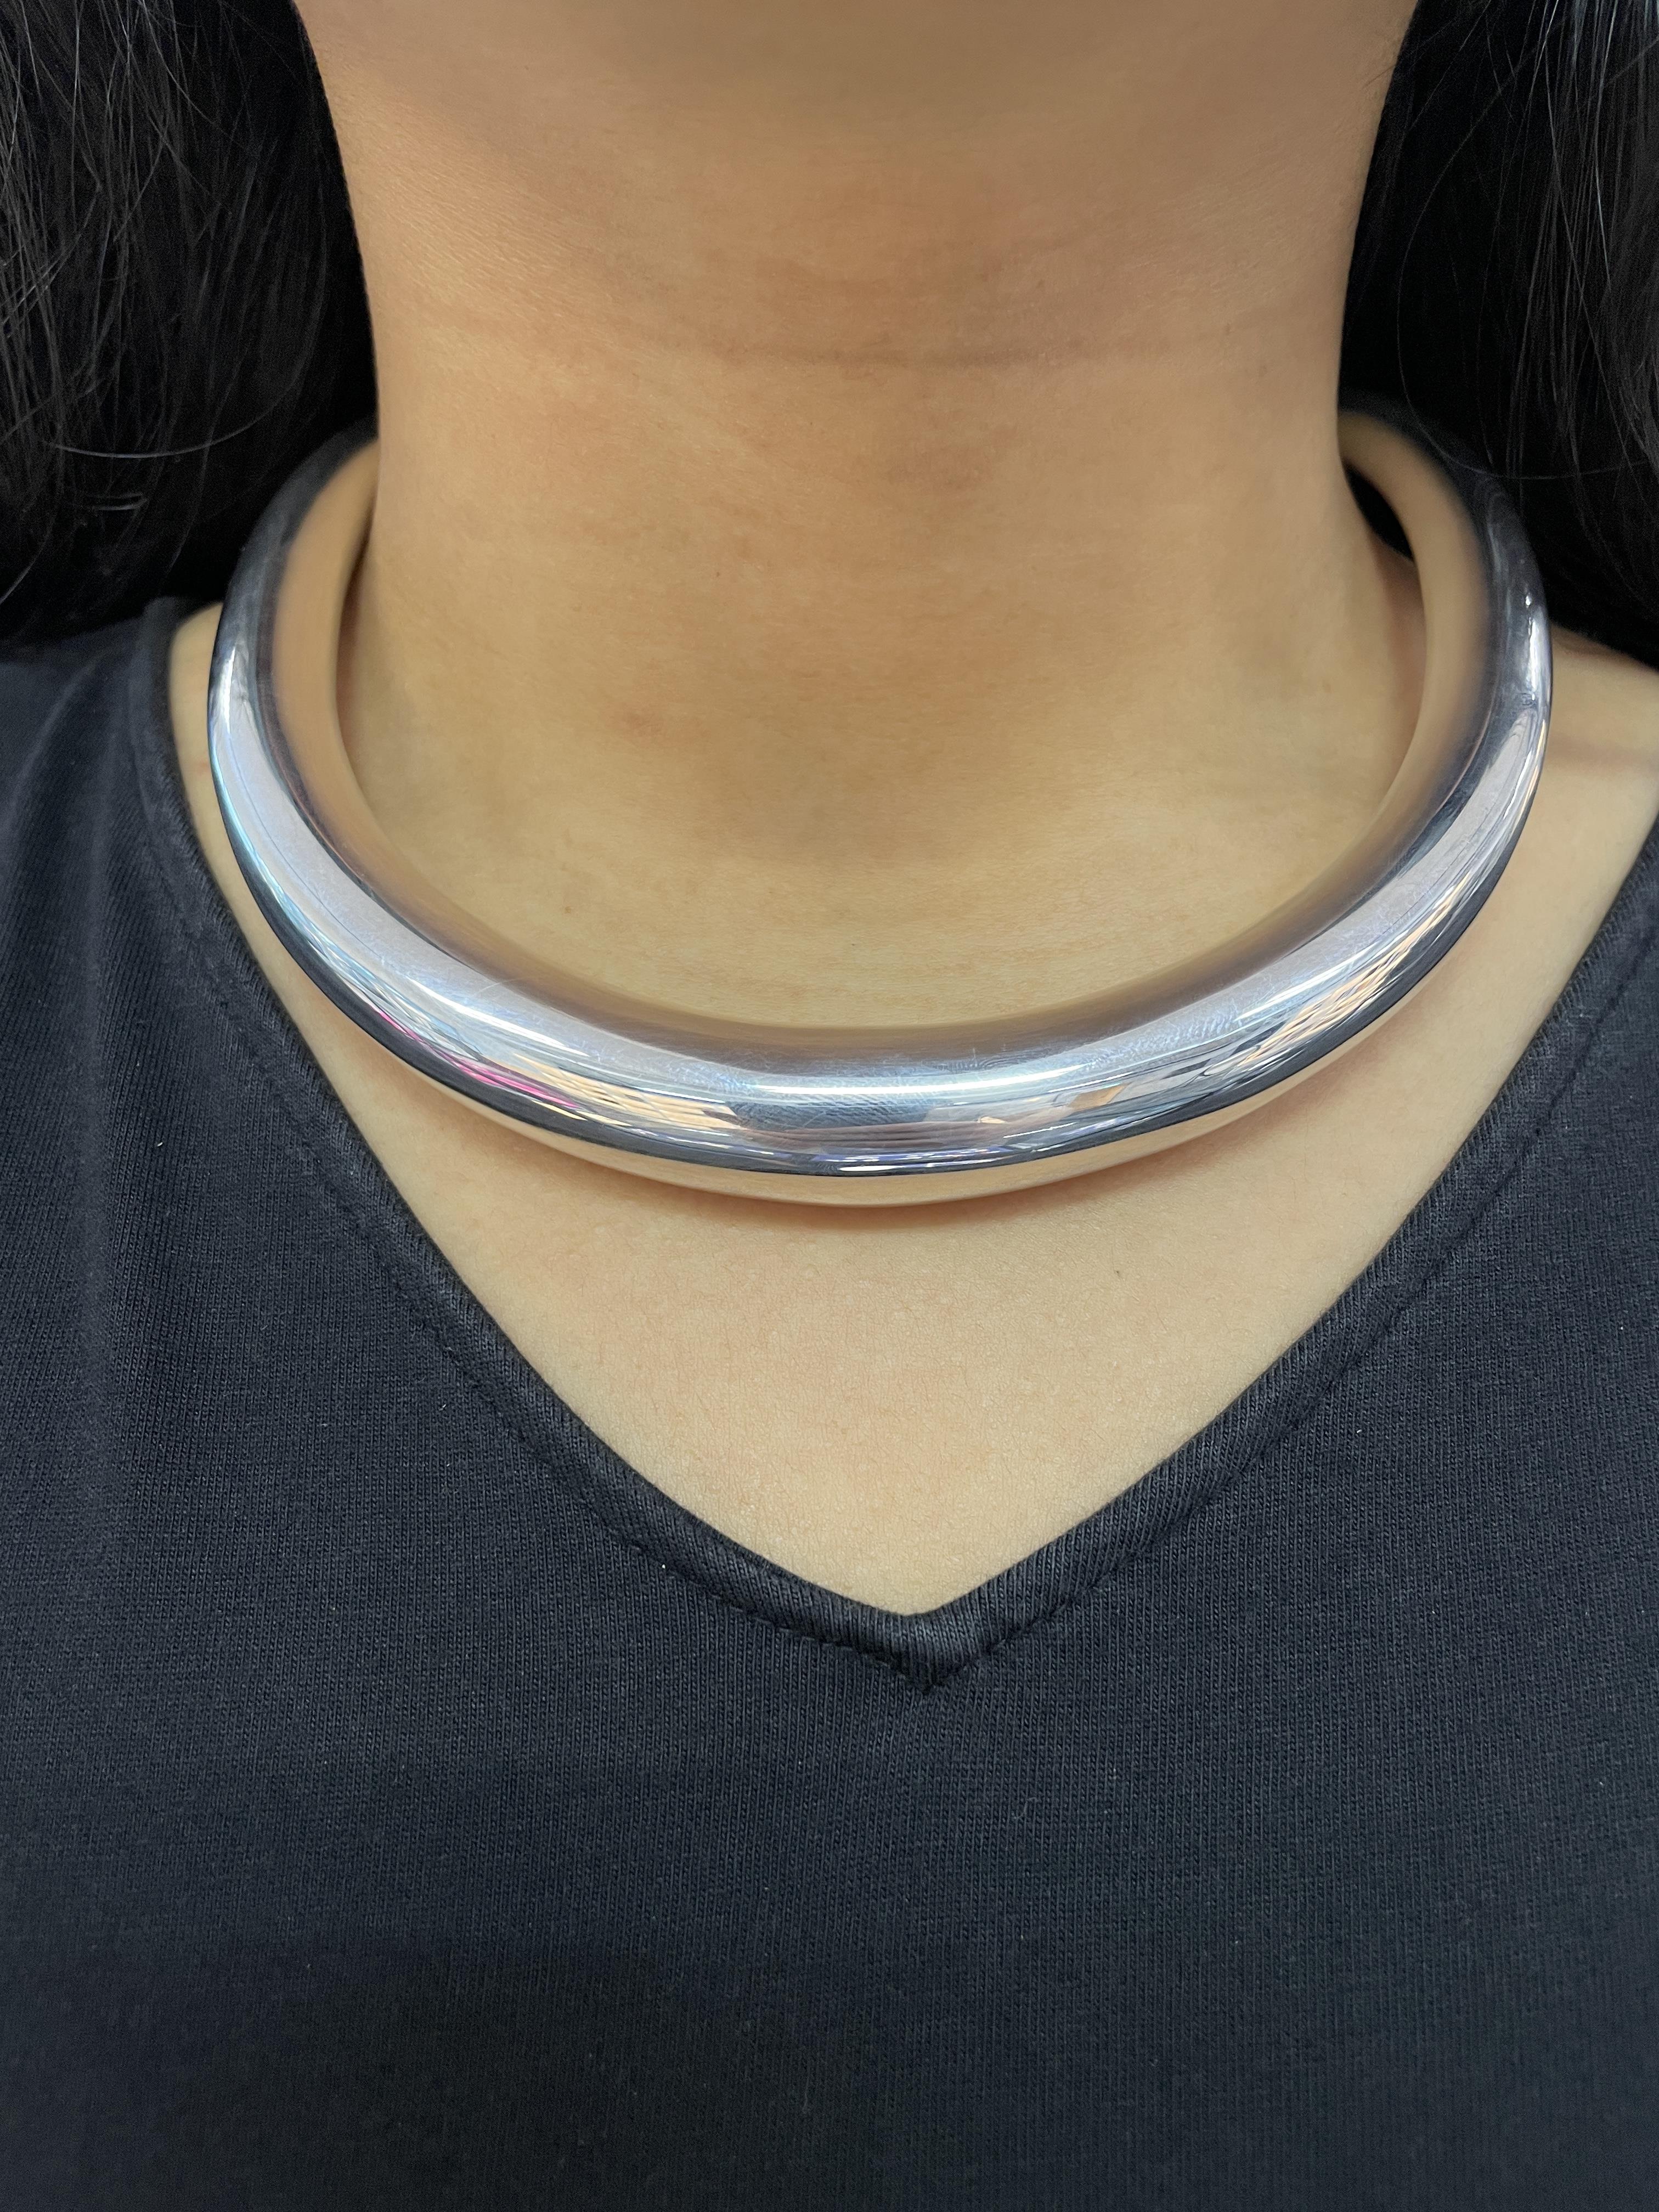 A LARGE SILVER CHOKER BY GEORG JENSEN - Image 4 of 4